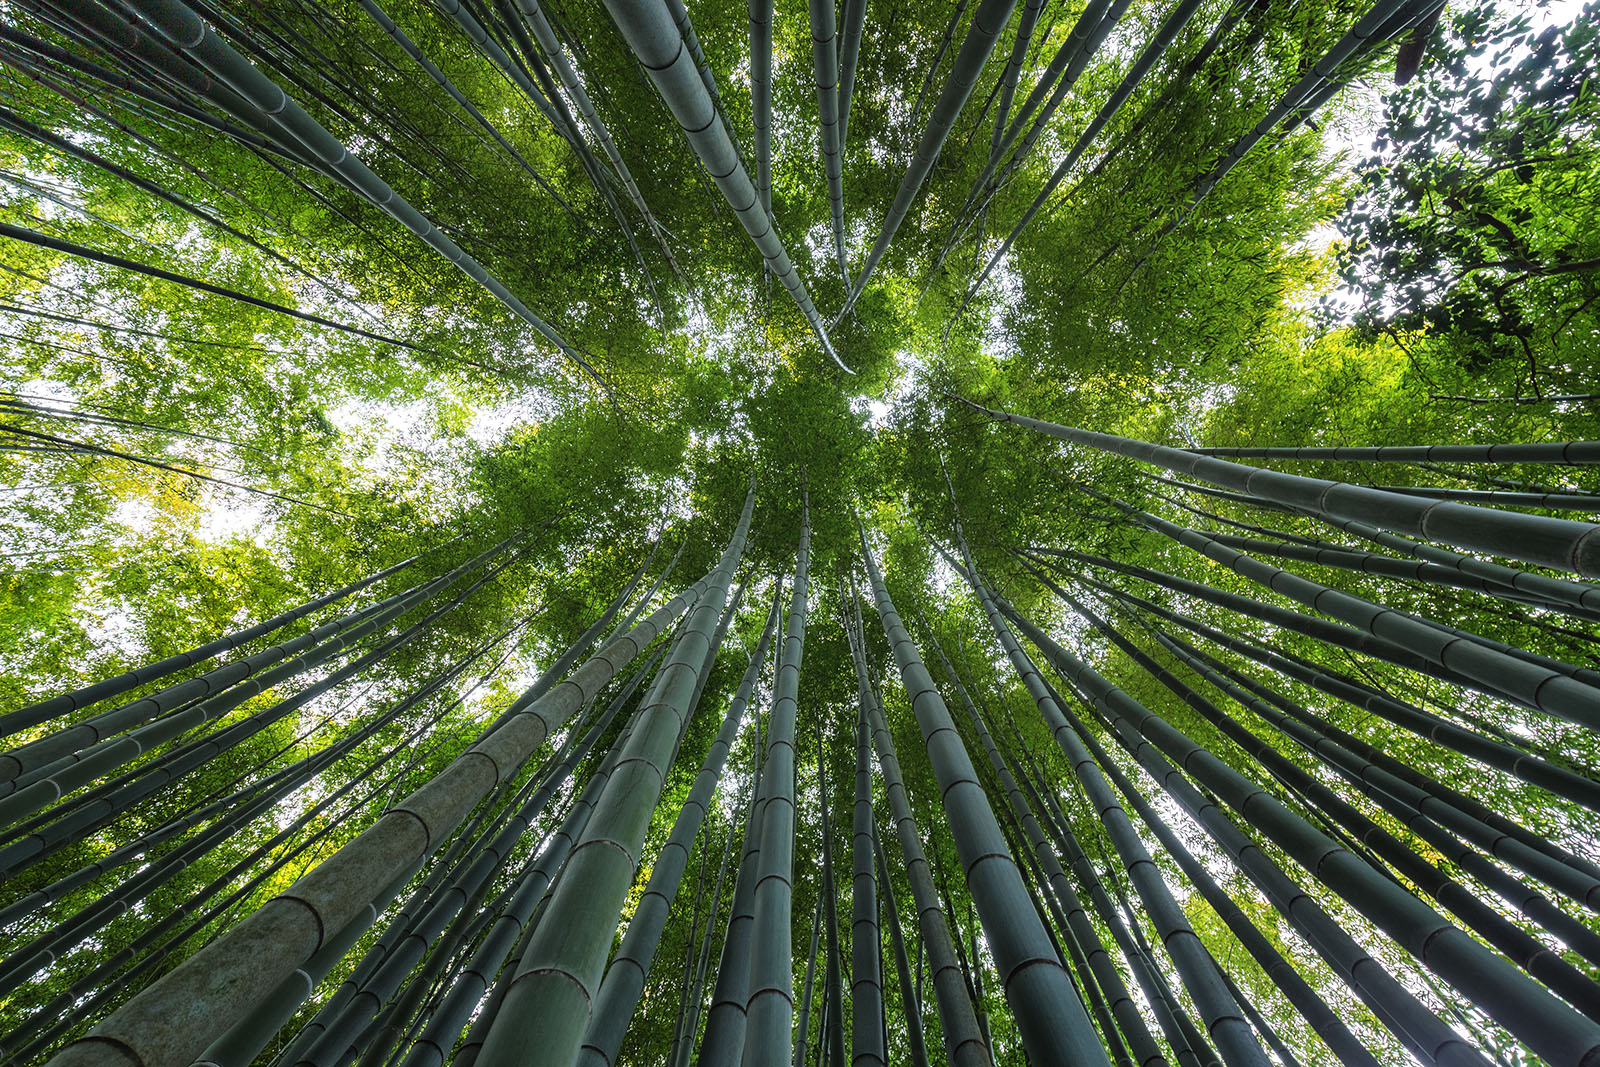 Bamboo forest...